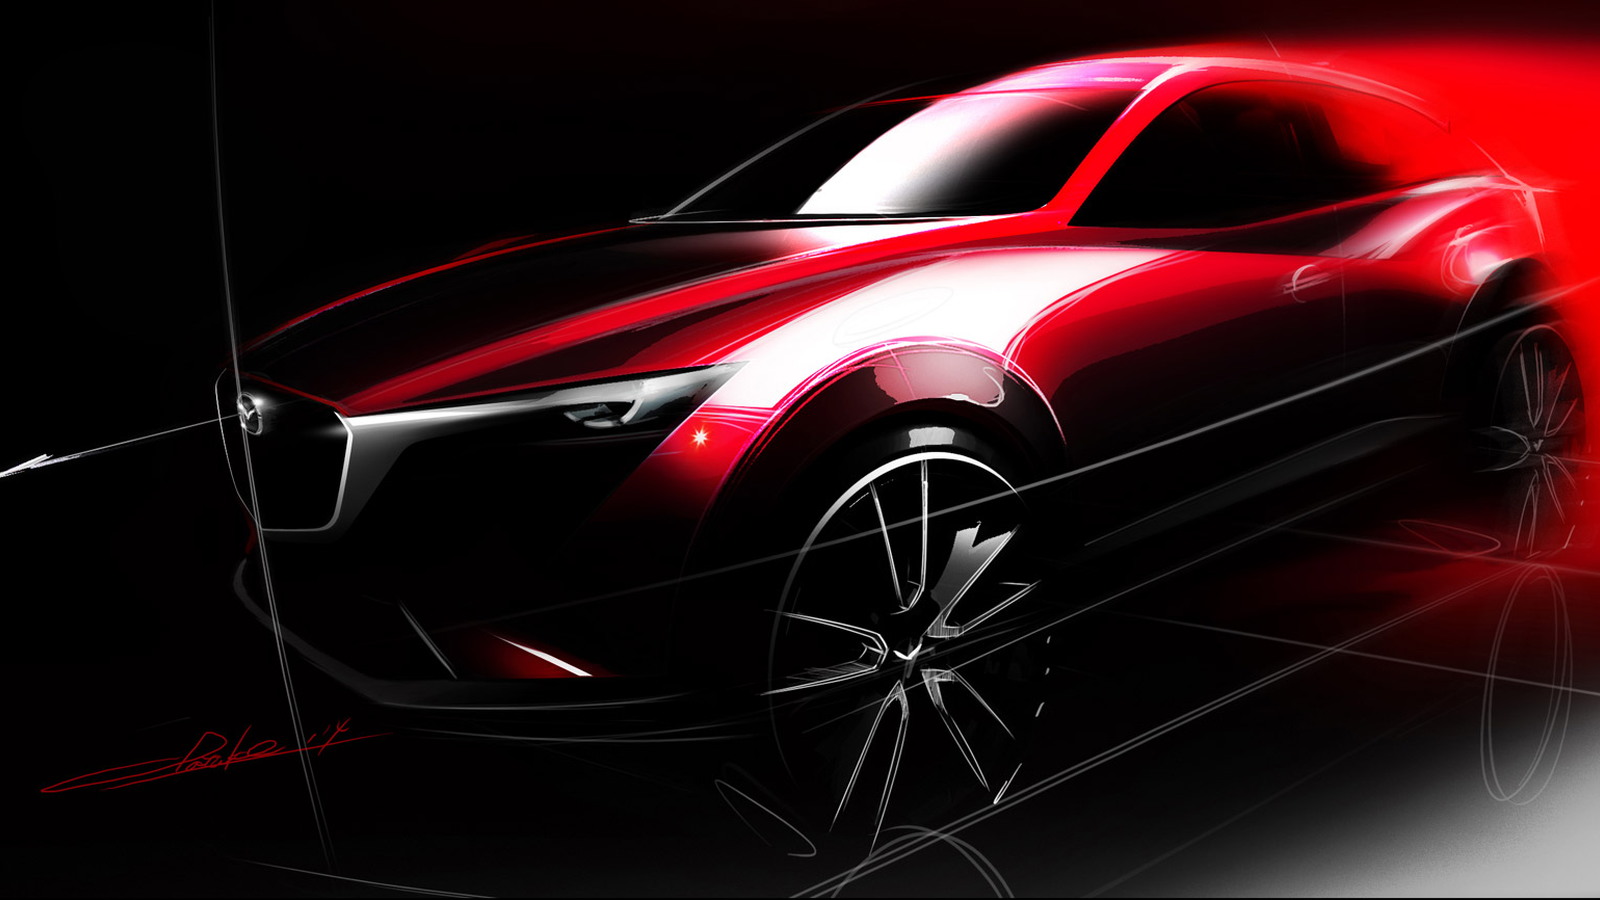 Teaser for Mazda CX-3 subcompact crossover